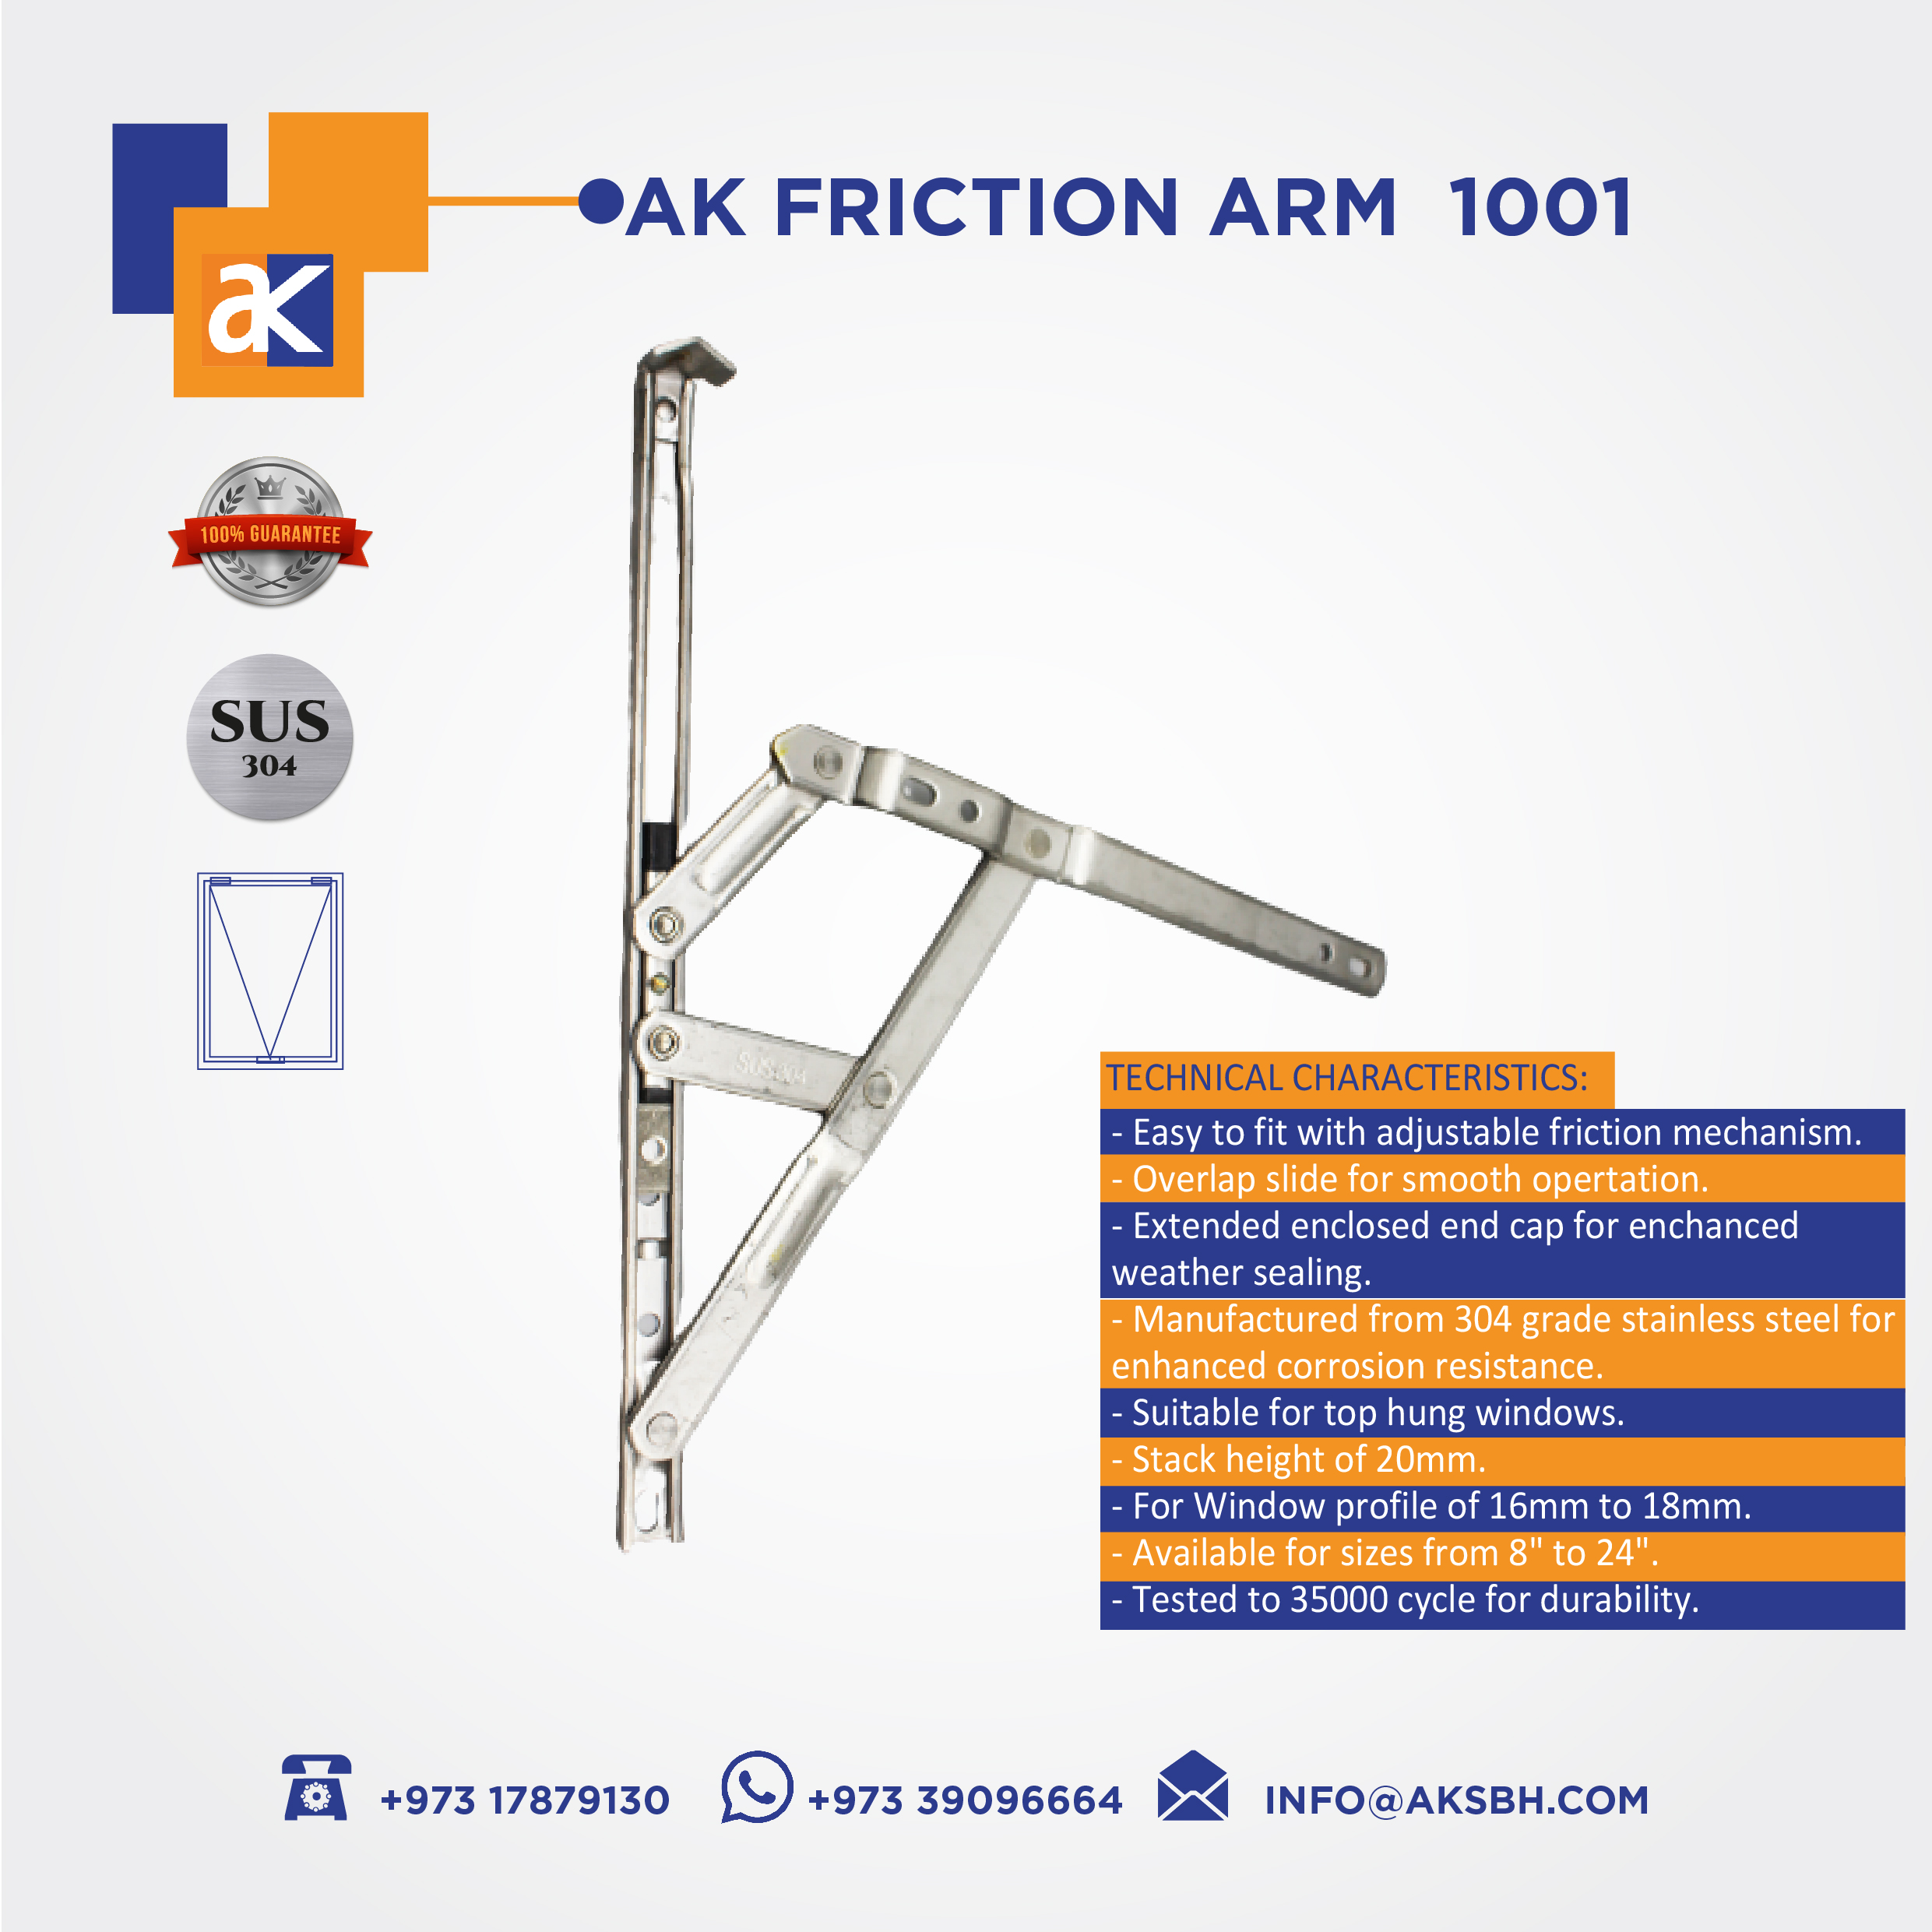 Friction Arm FOR WINDOW BY AK